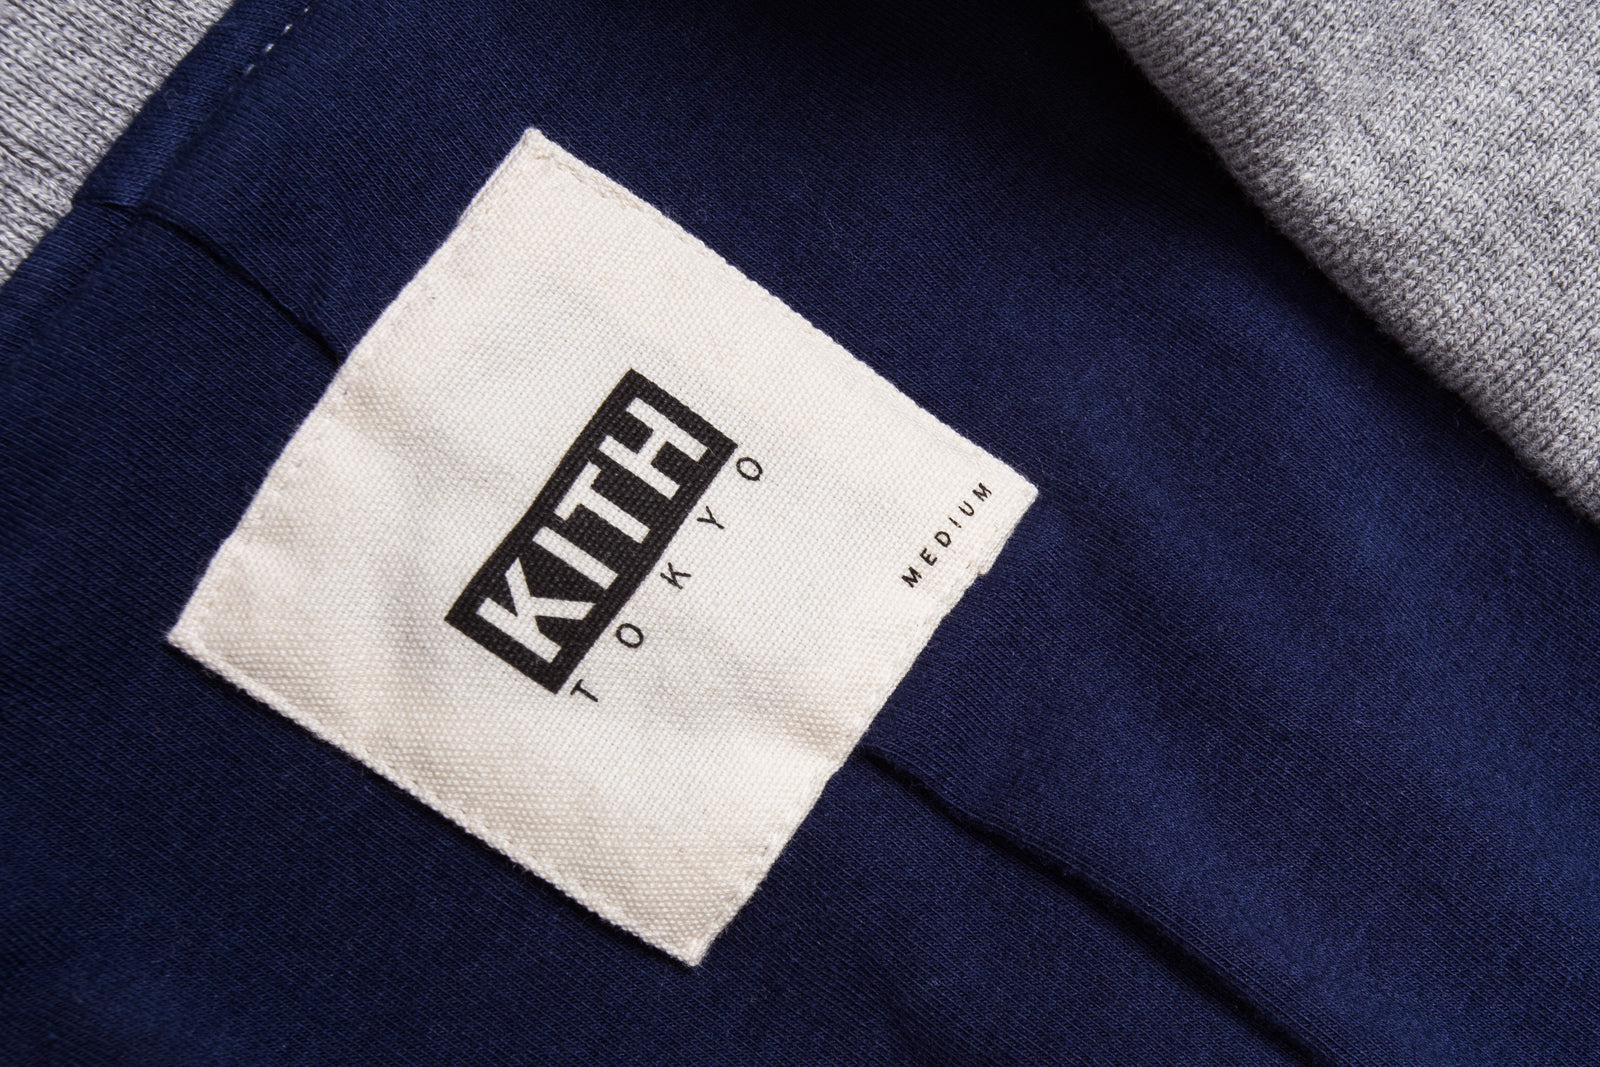 KITH x ONES STROKE GENESIS COLLECTION @ KITH NYC – Kith